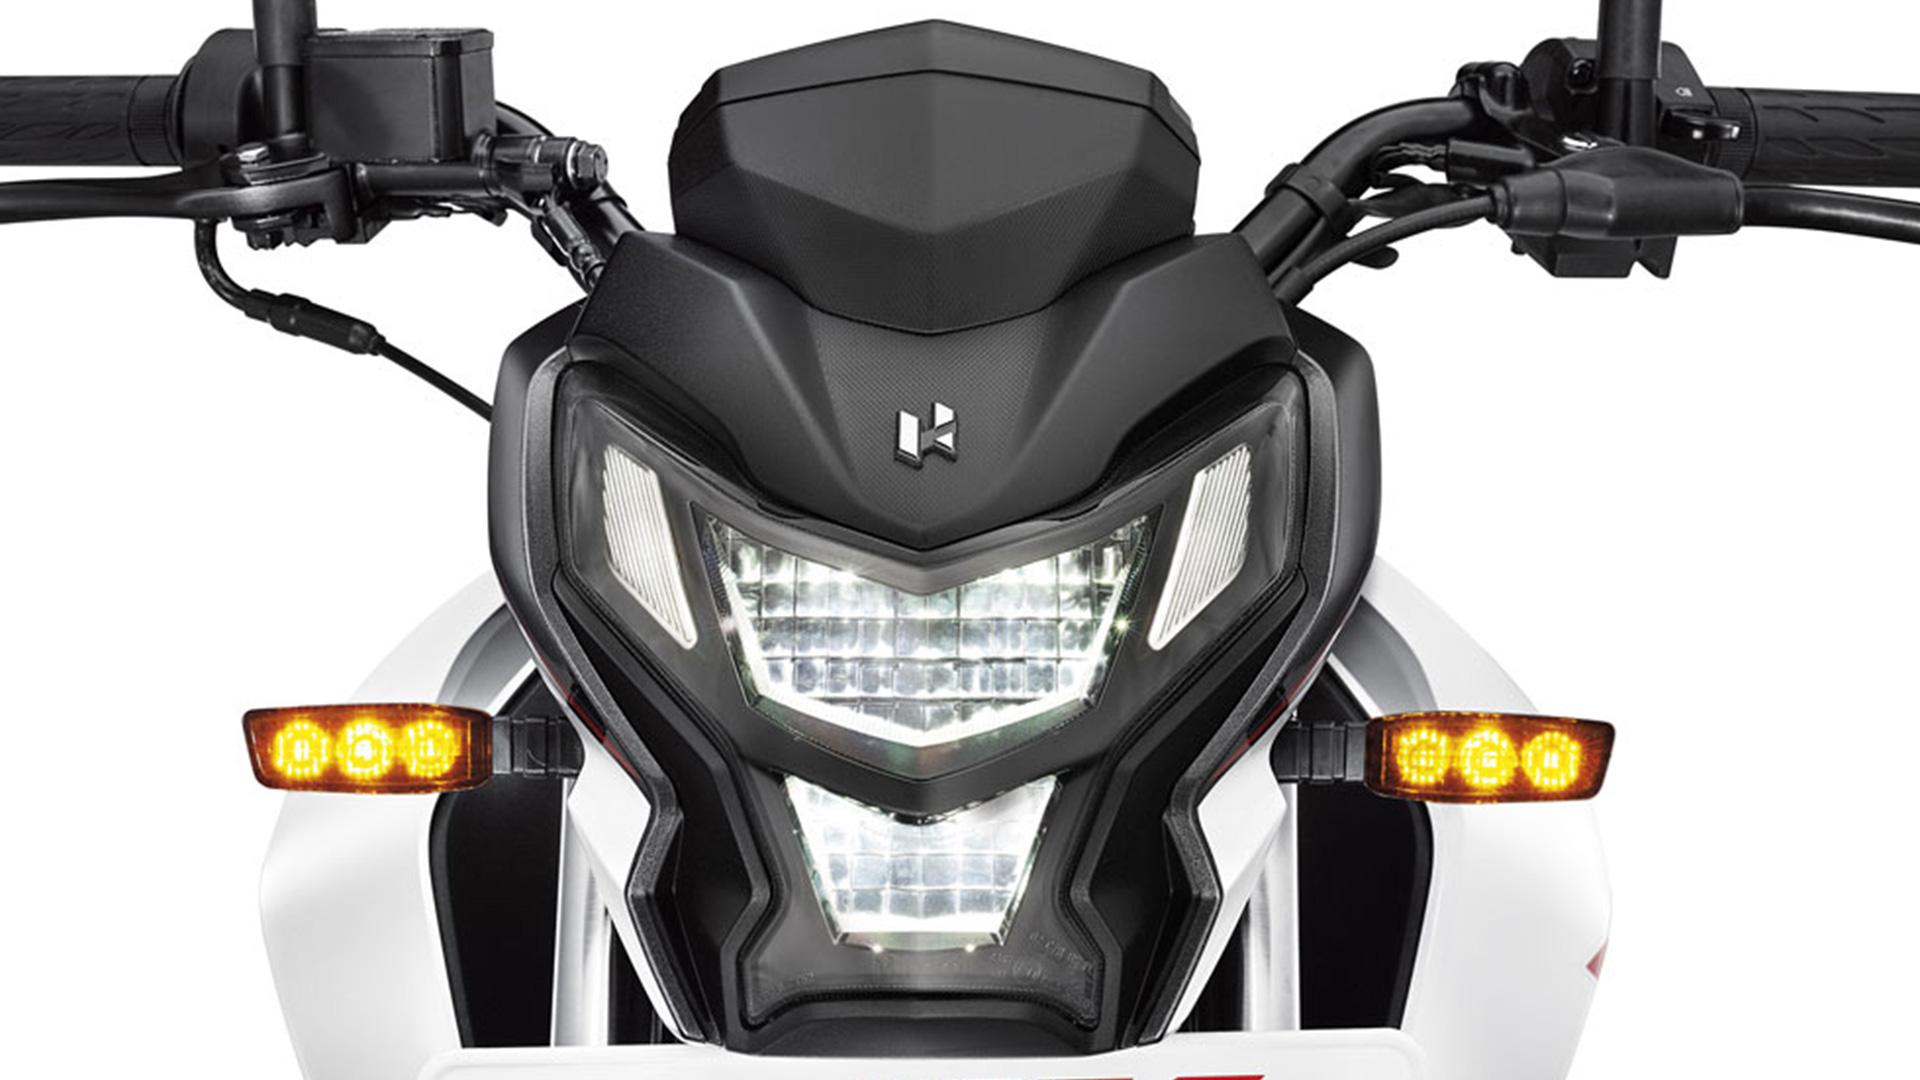 Hero Xtreme 160r Price Mileage Reviews Specification Gallery Overdrive